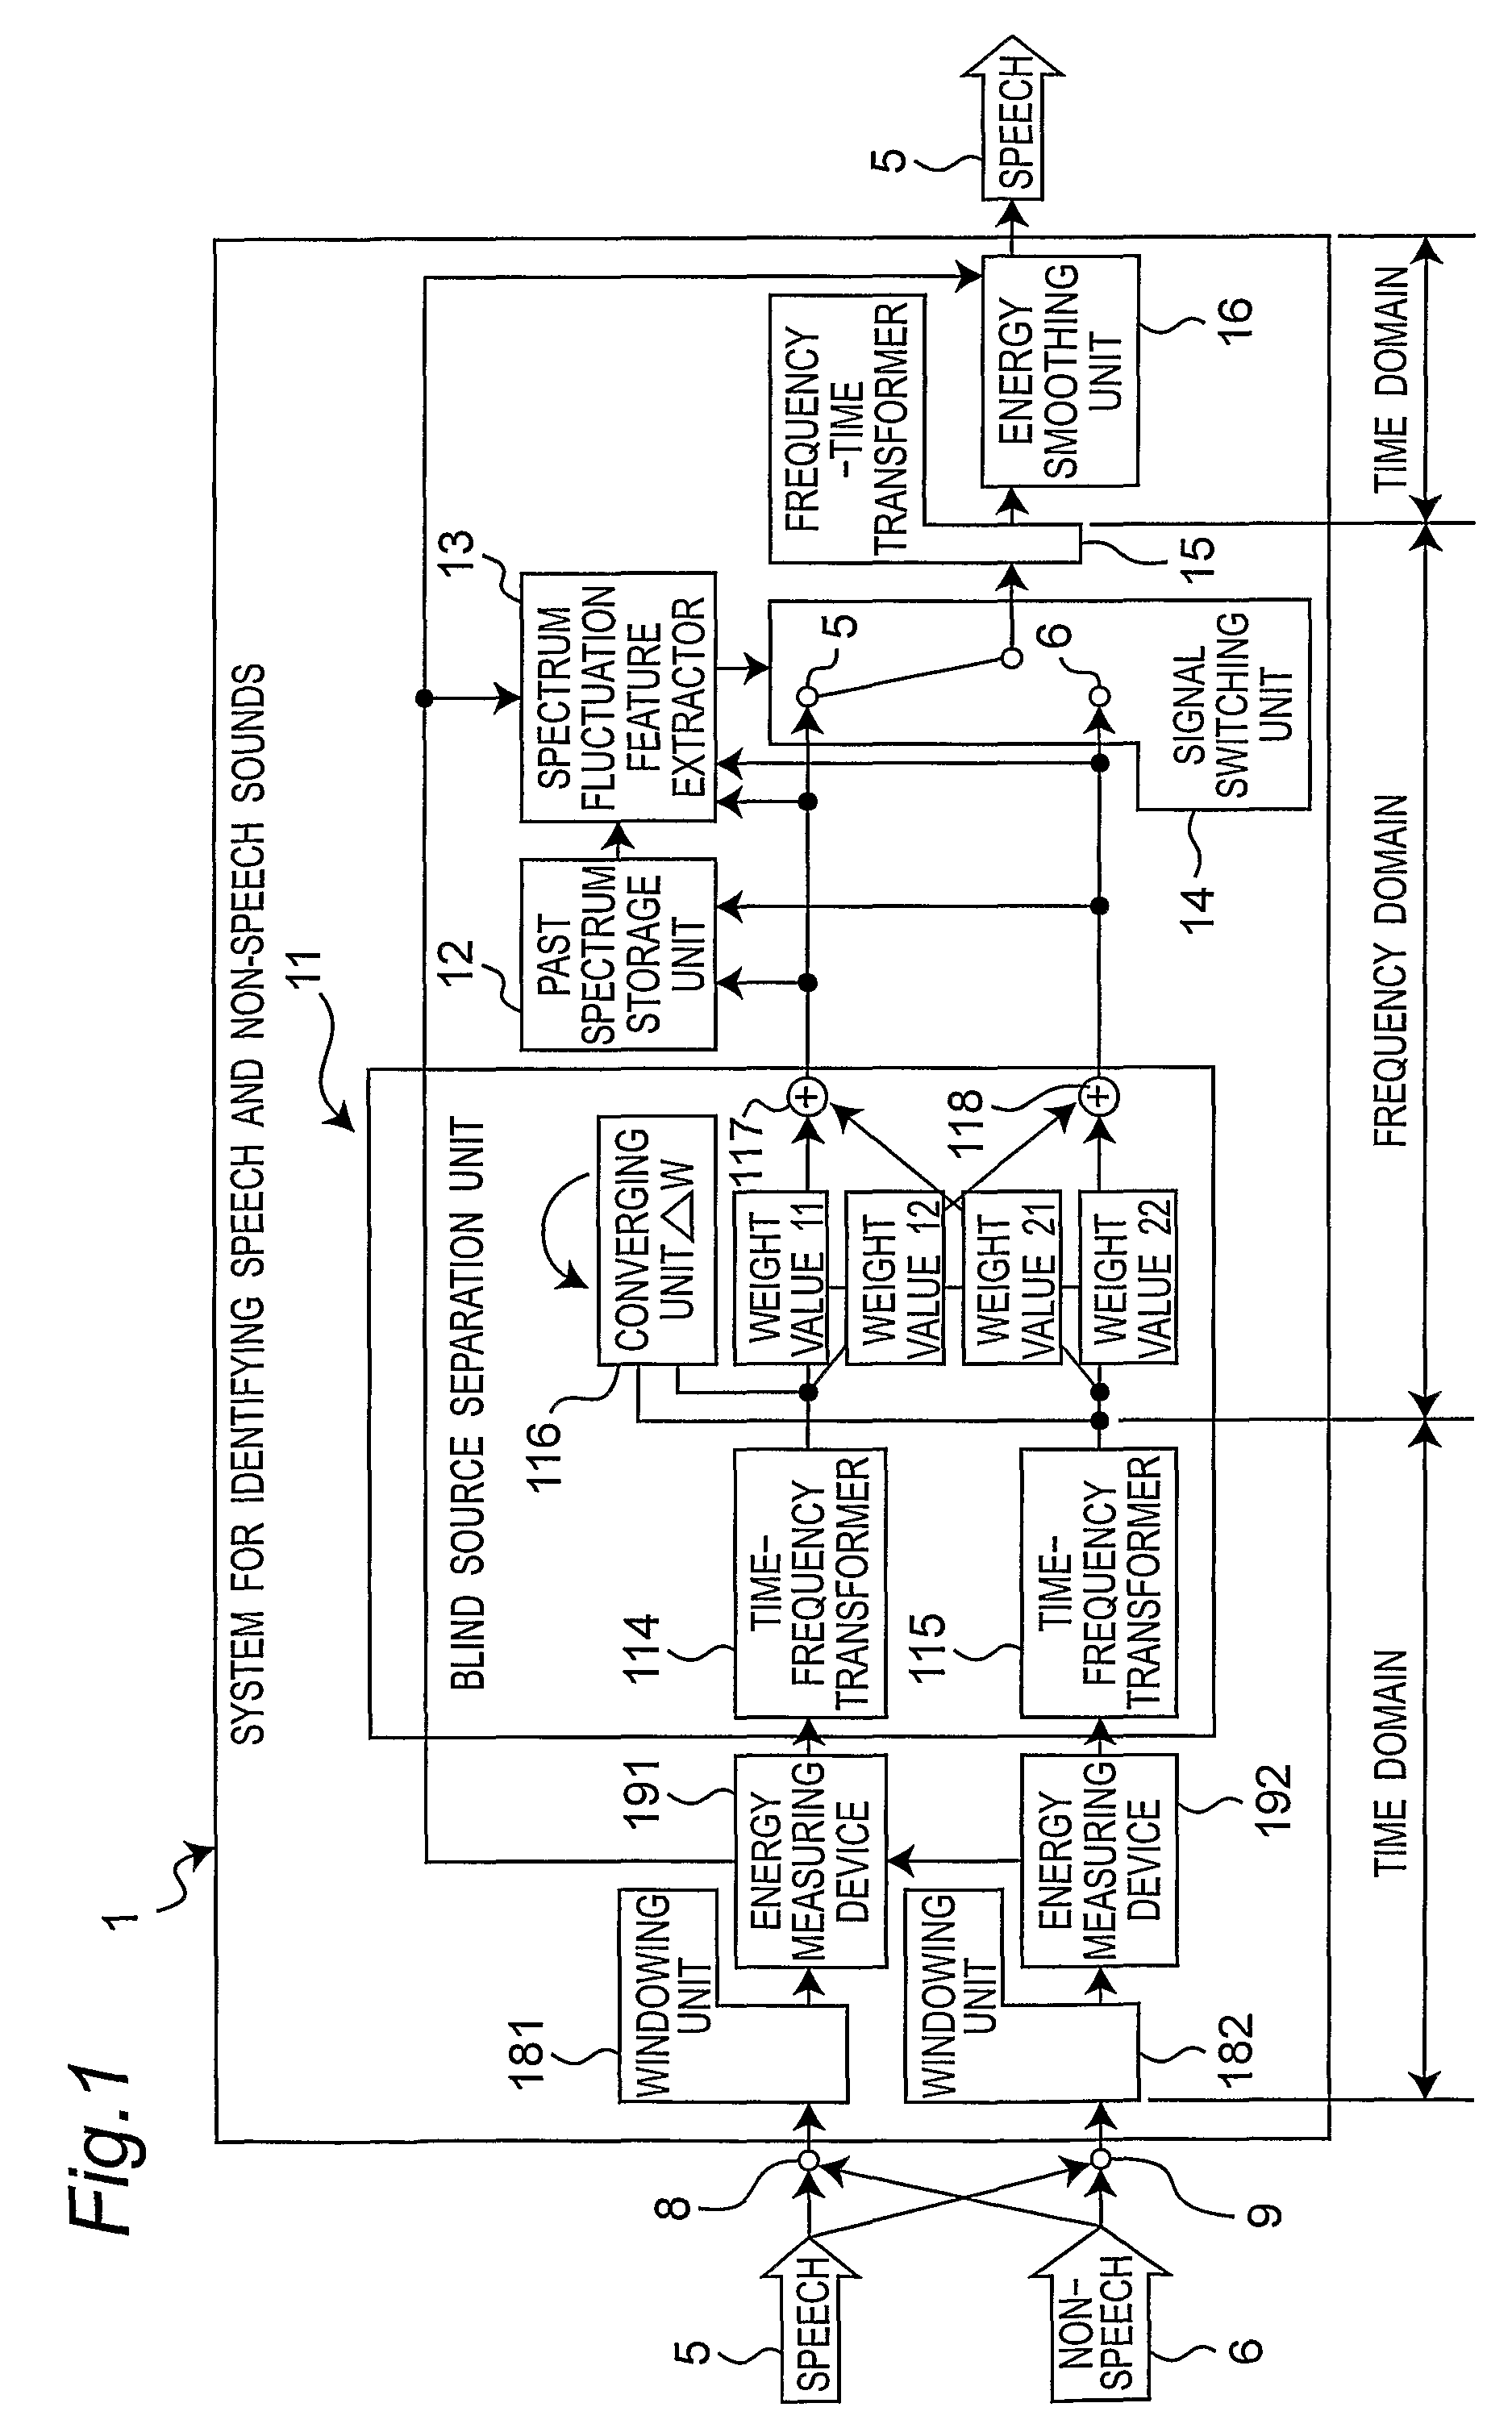 Method and system for identifying speech sound and non-speech sound in an environment